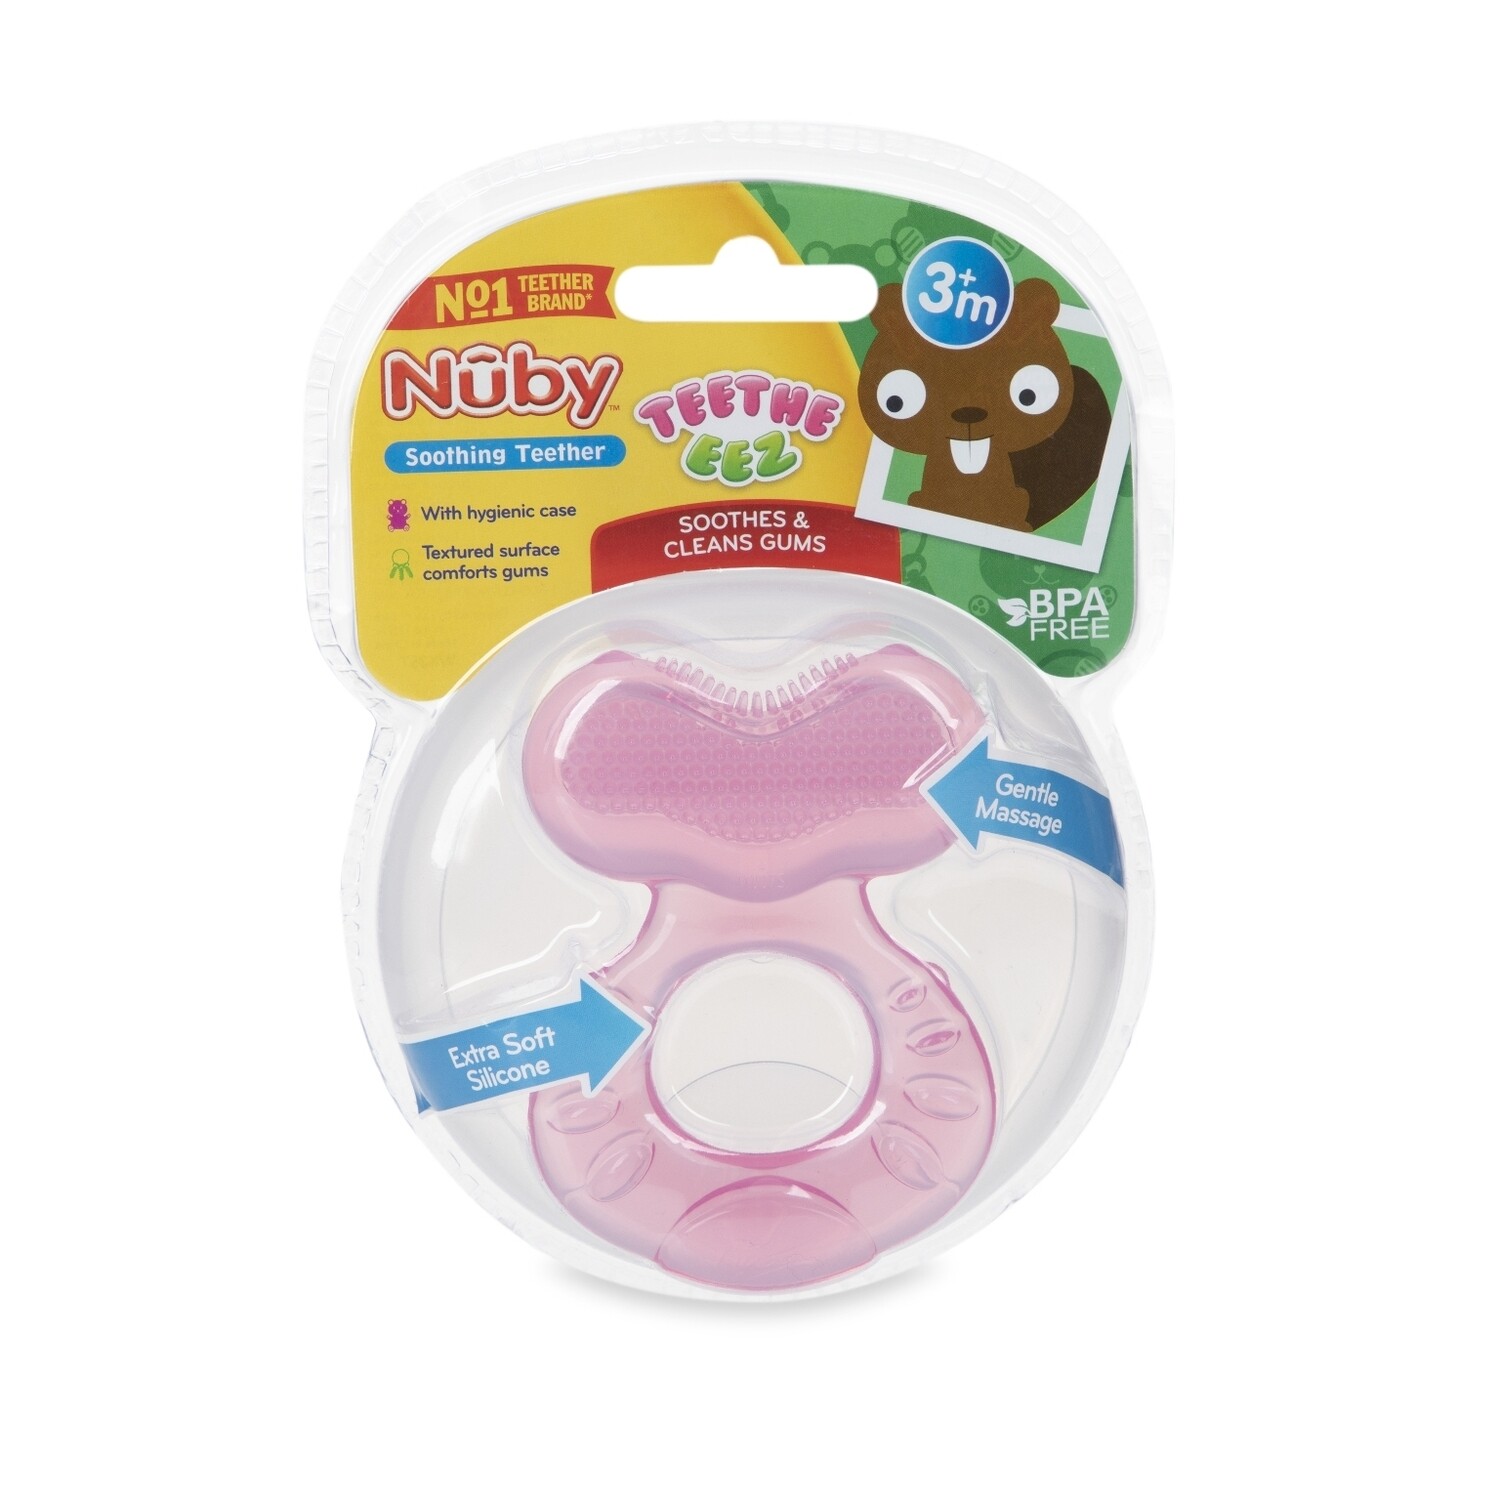 . Case of [48] Nuby Silicone Teethe-eez Teethers - 3M+, Pink, Hygienic Case .